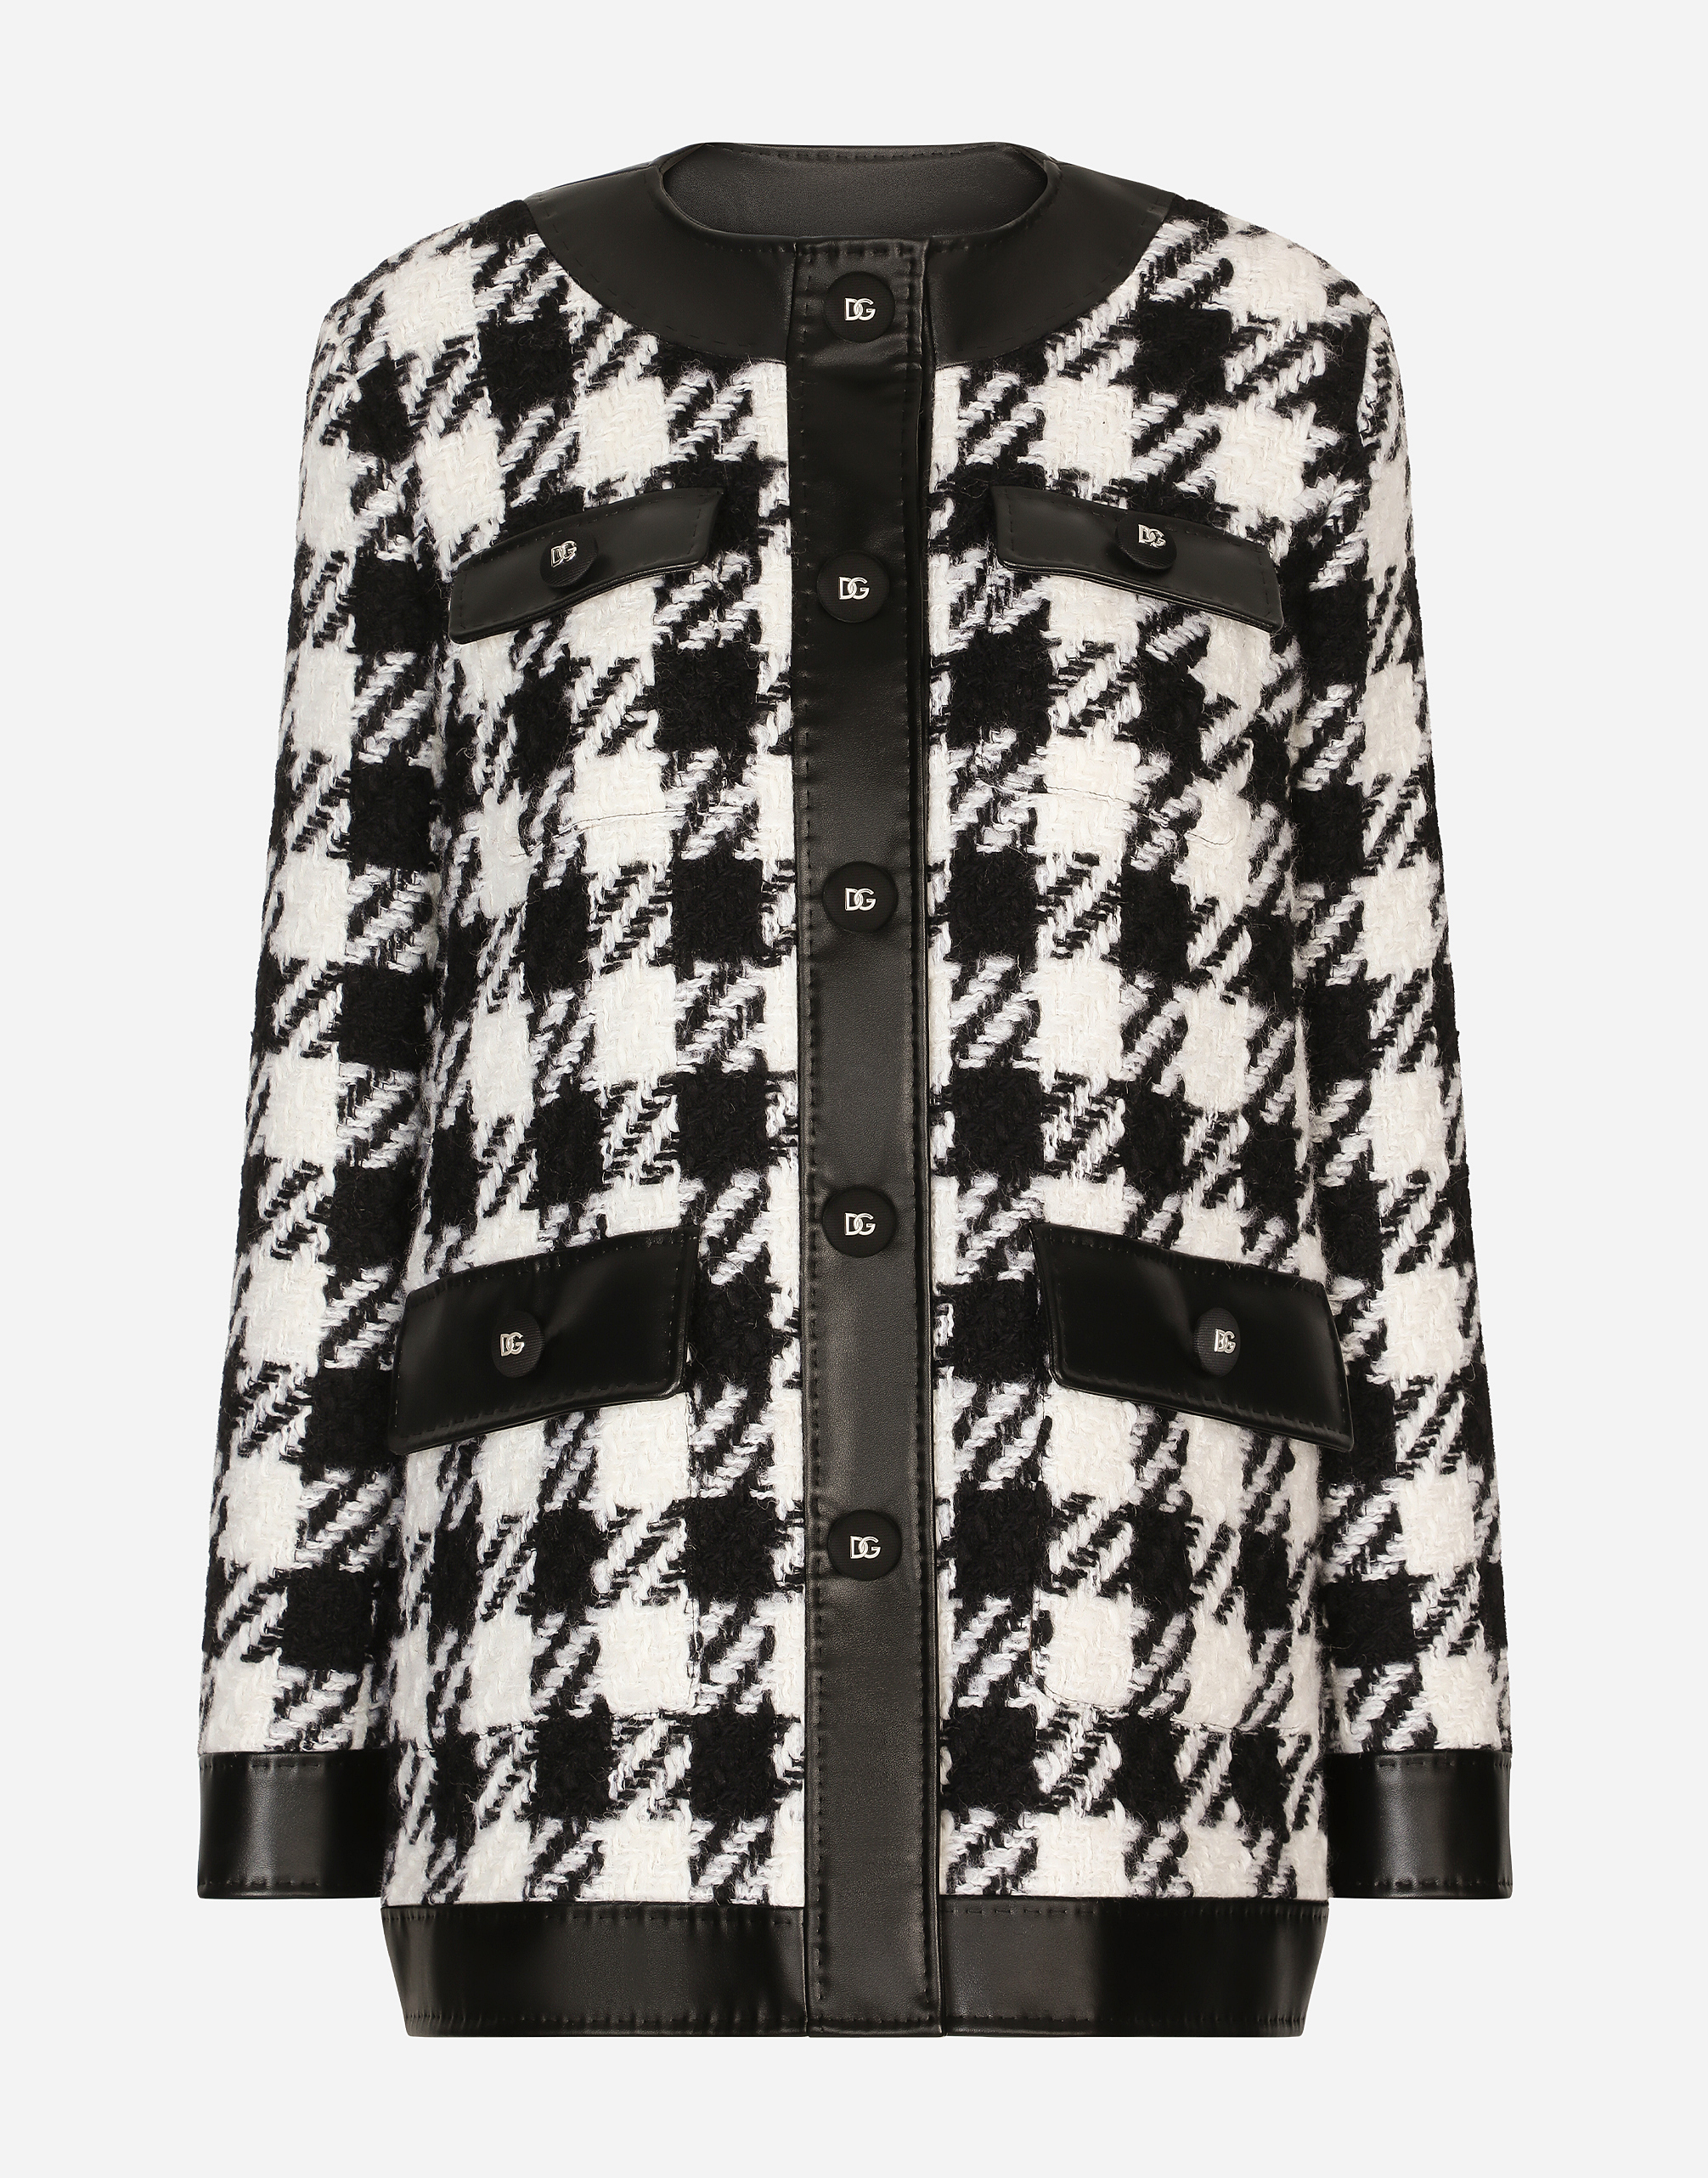 Houndstooth jacket in Multicolor